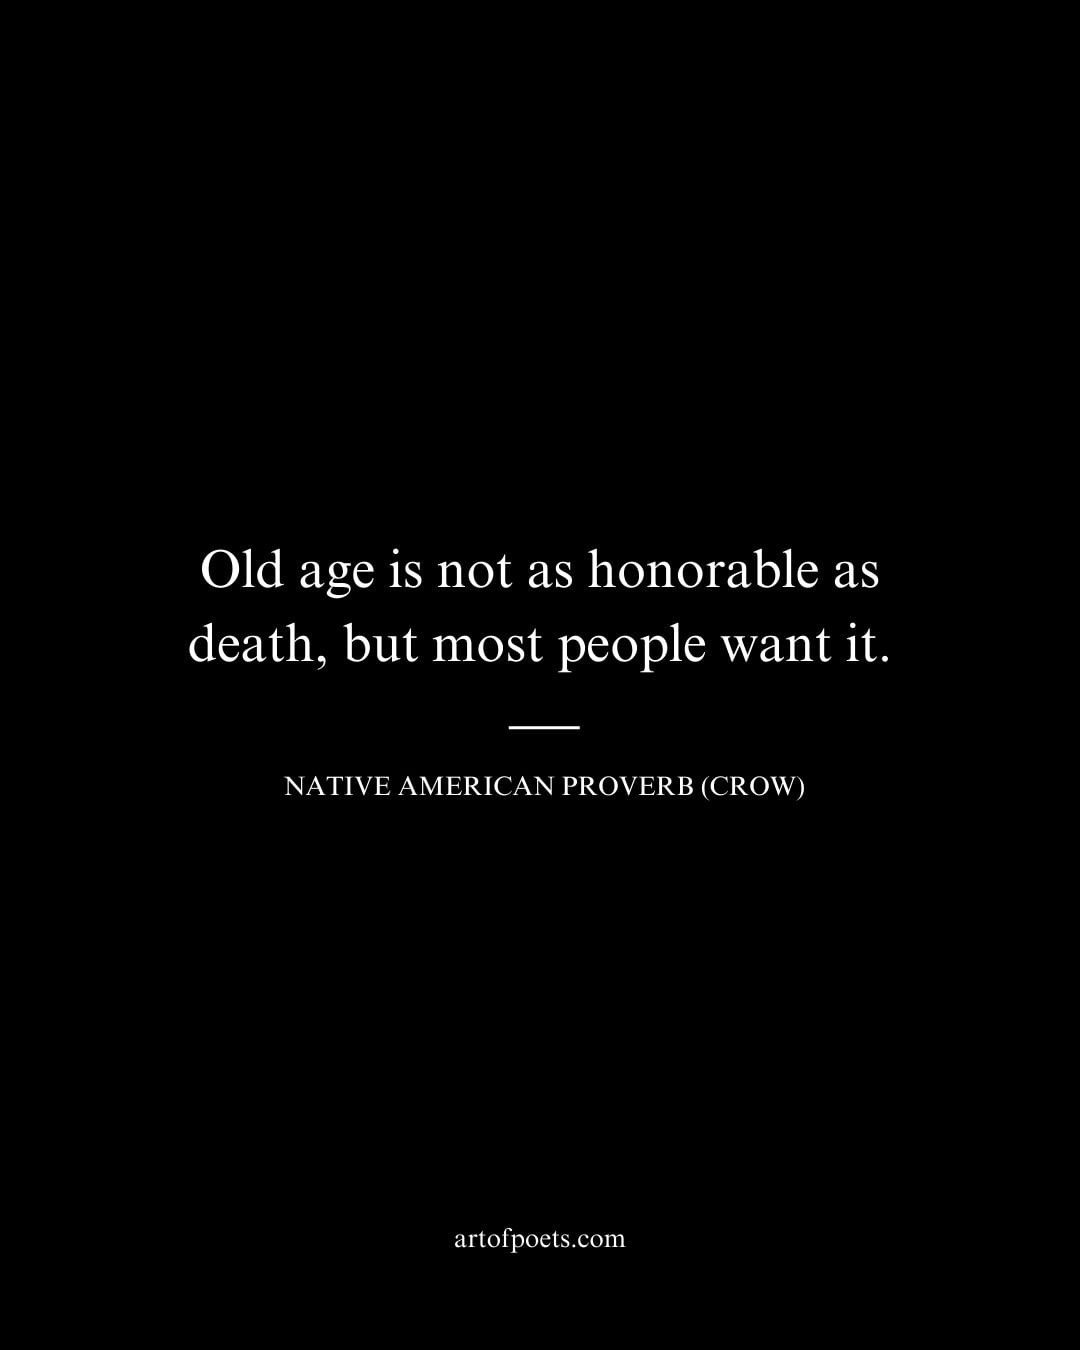 Old age is not as honorable as death but most people want it